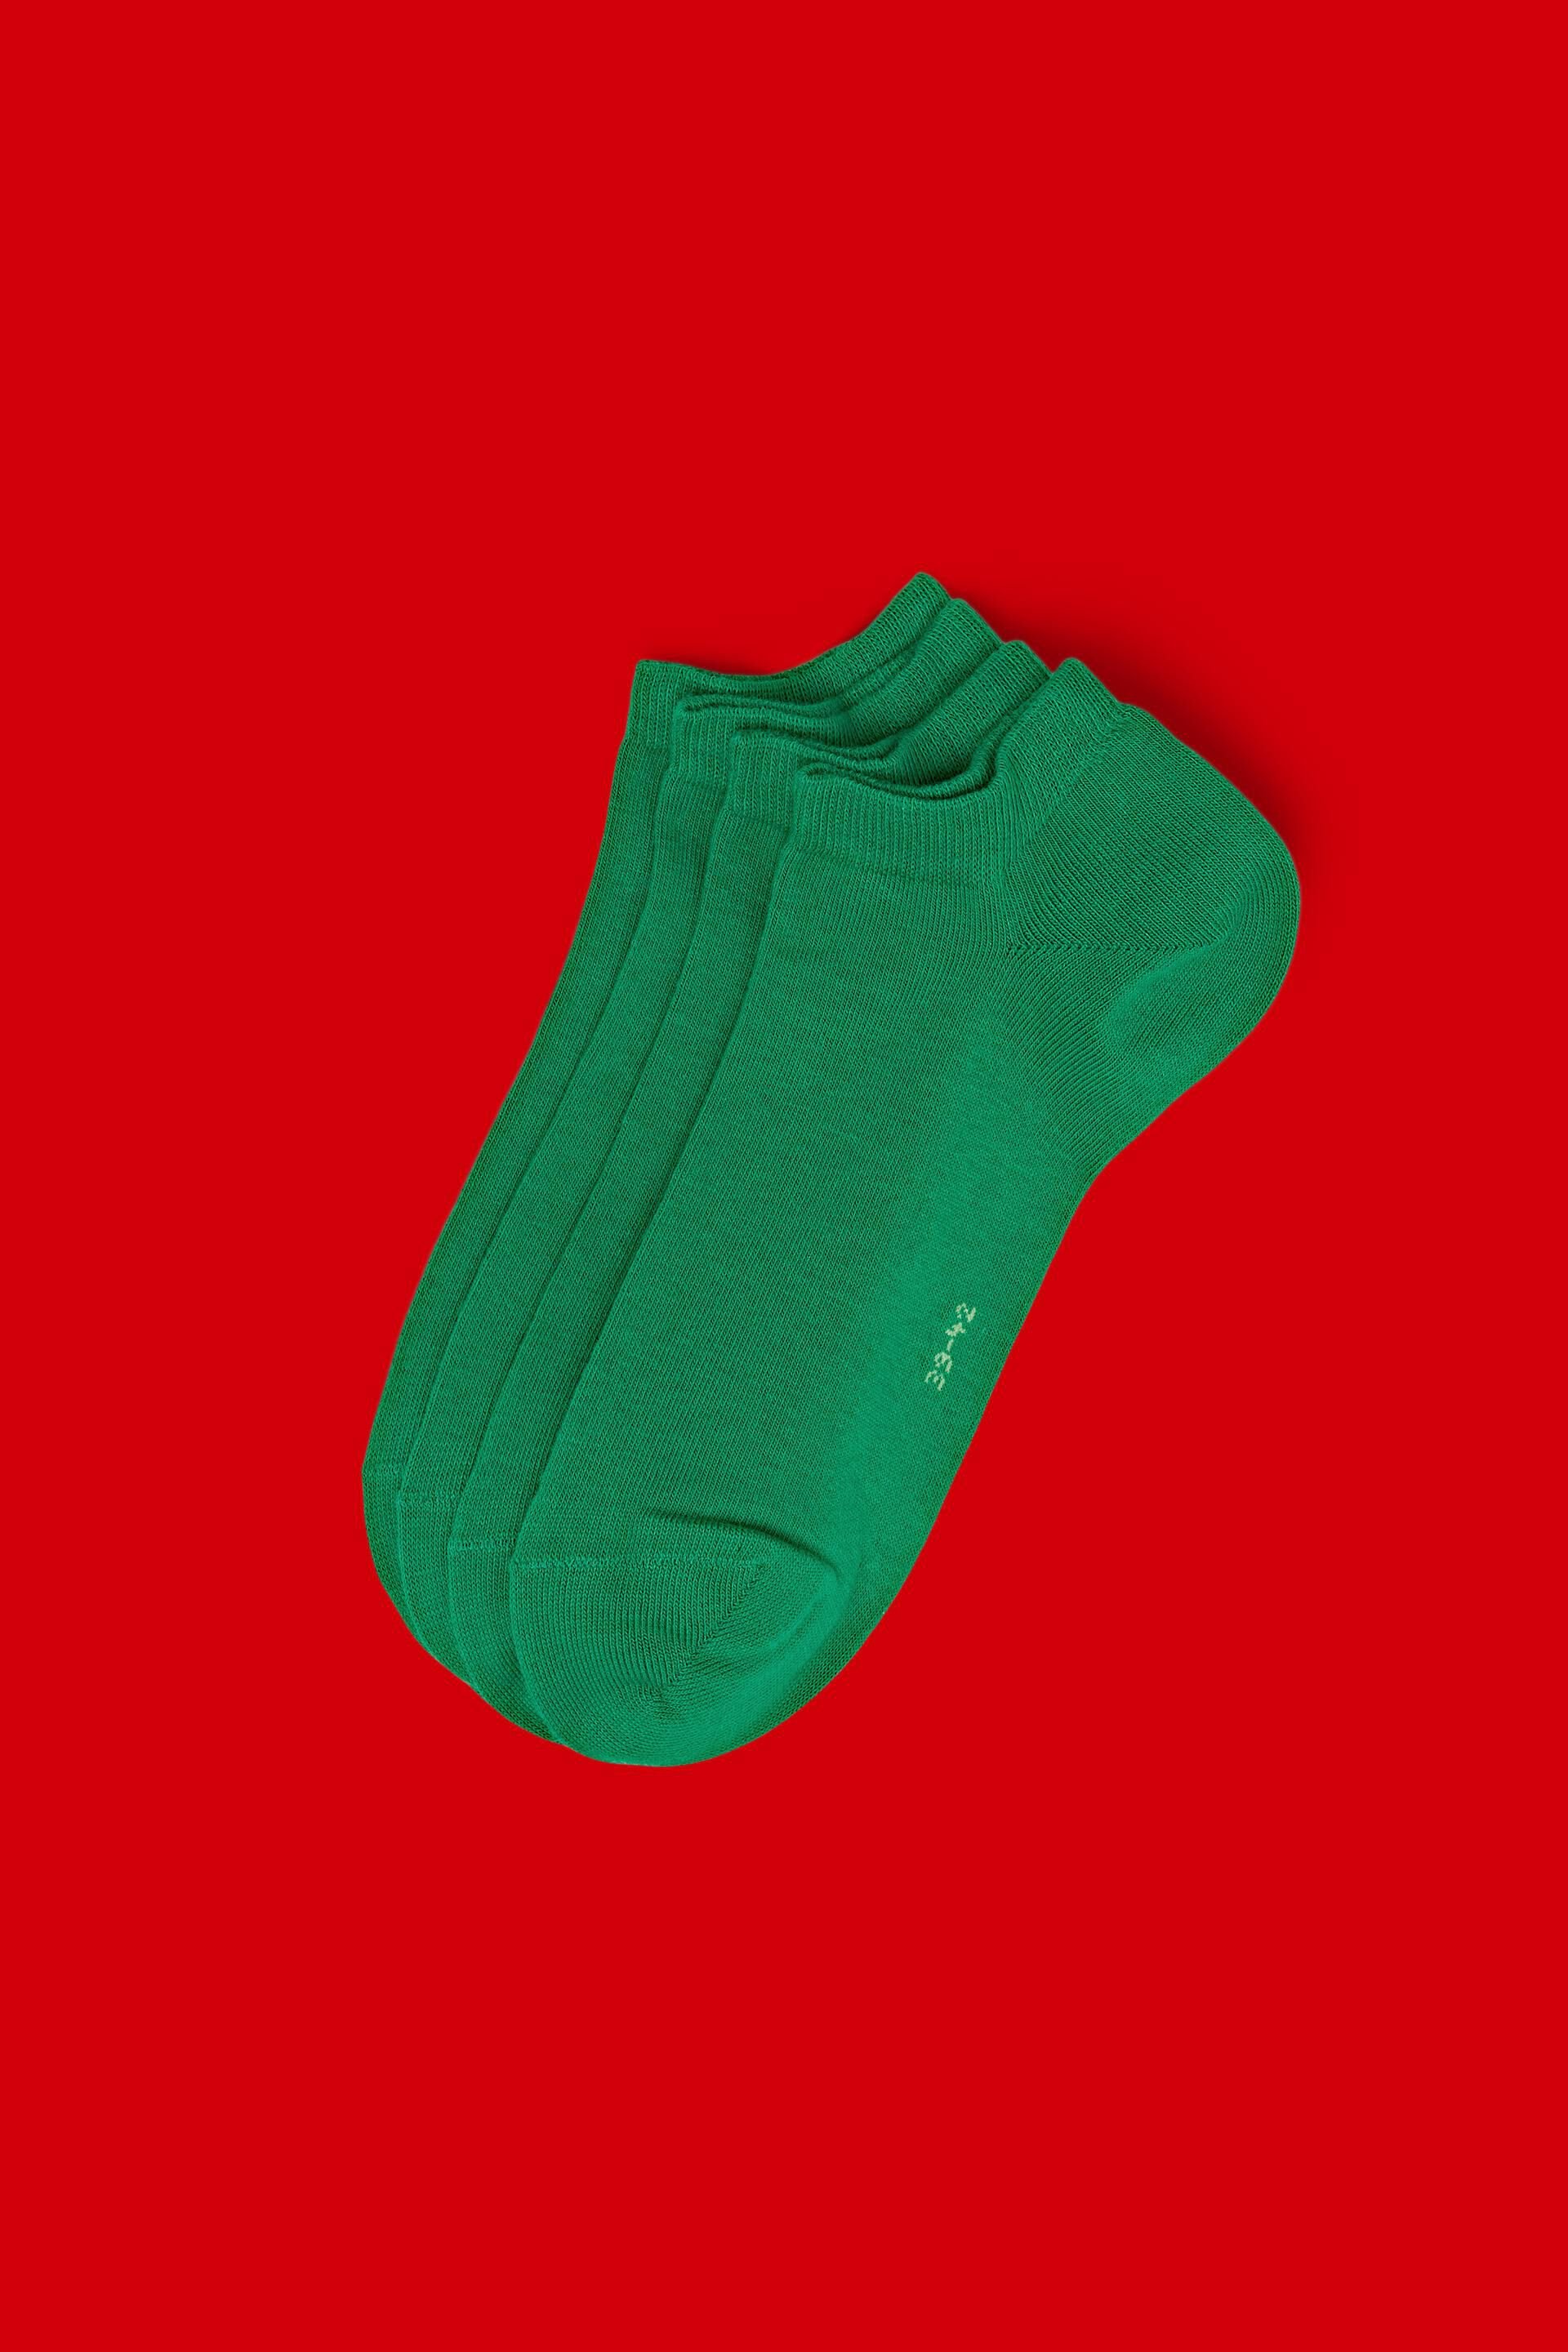 Esprit in Double trainer cotton an pack blend of organic socks